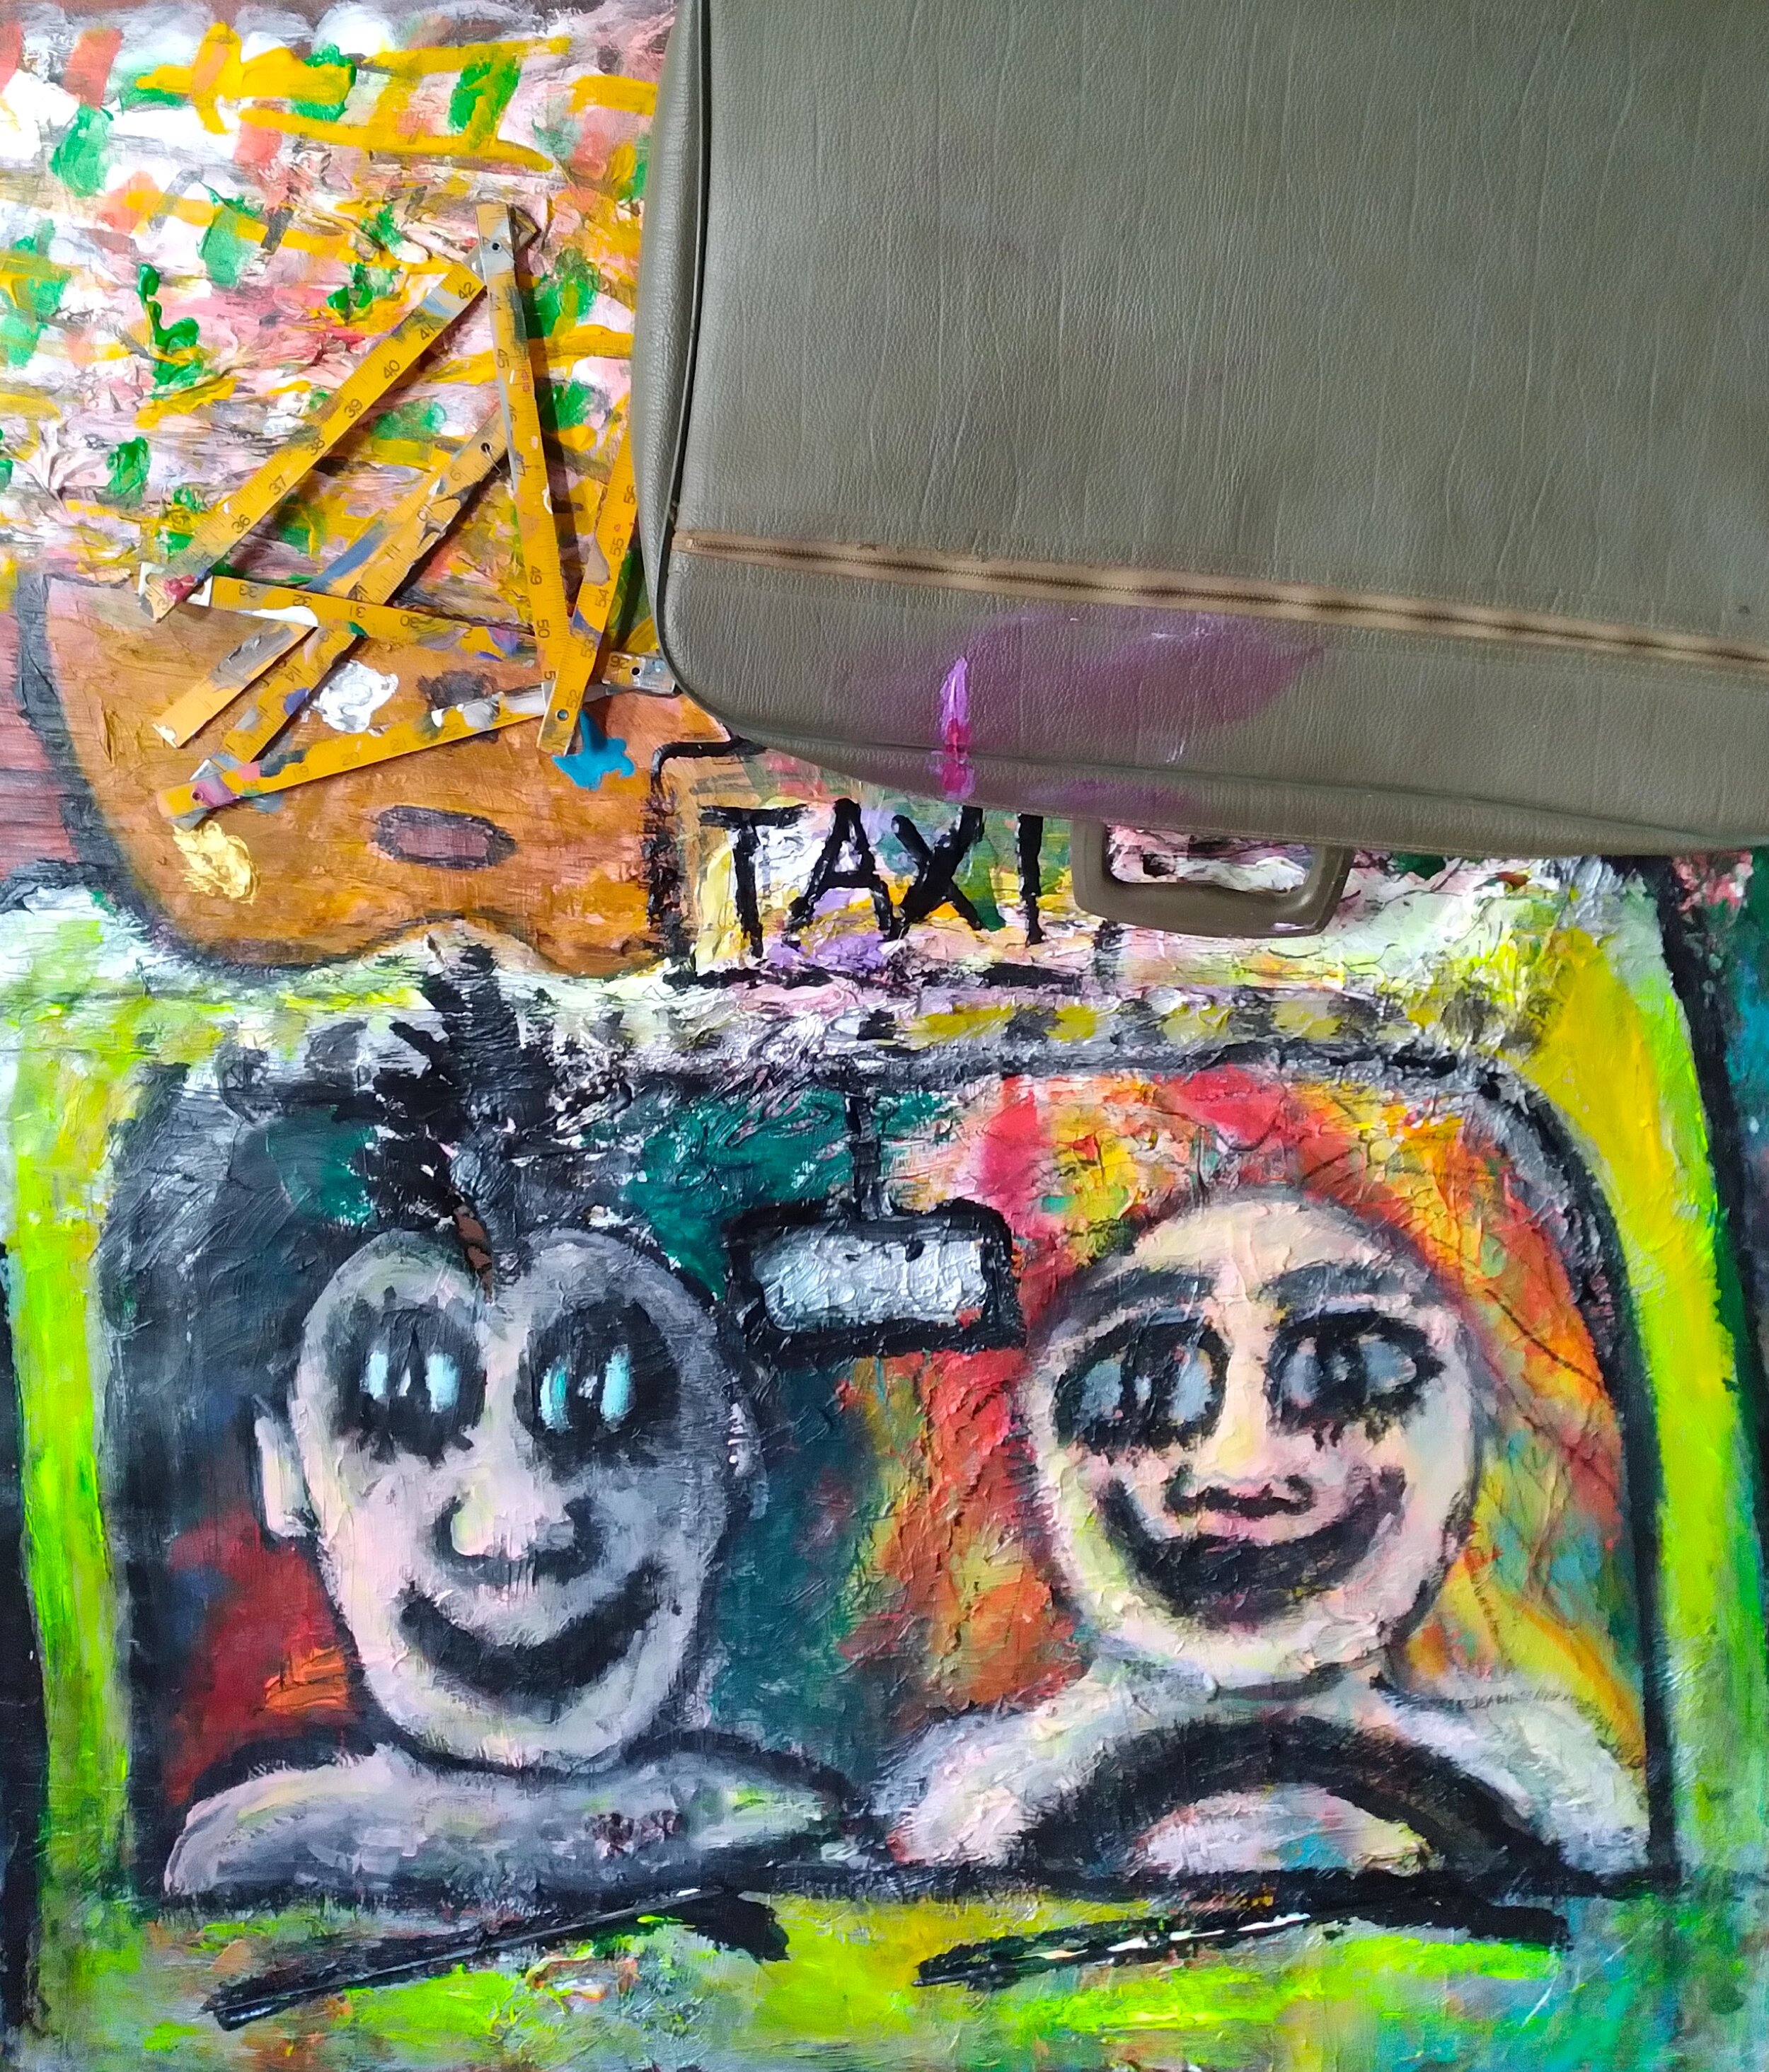 Travis and Iris, 2017. Oil, acrylic, ruler, suitcase on canvas. 42" x 36".